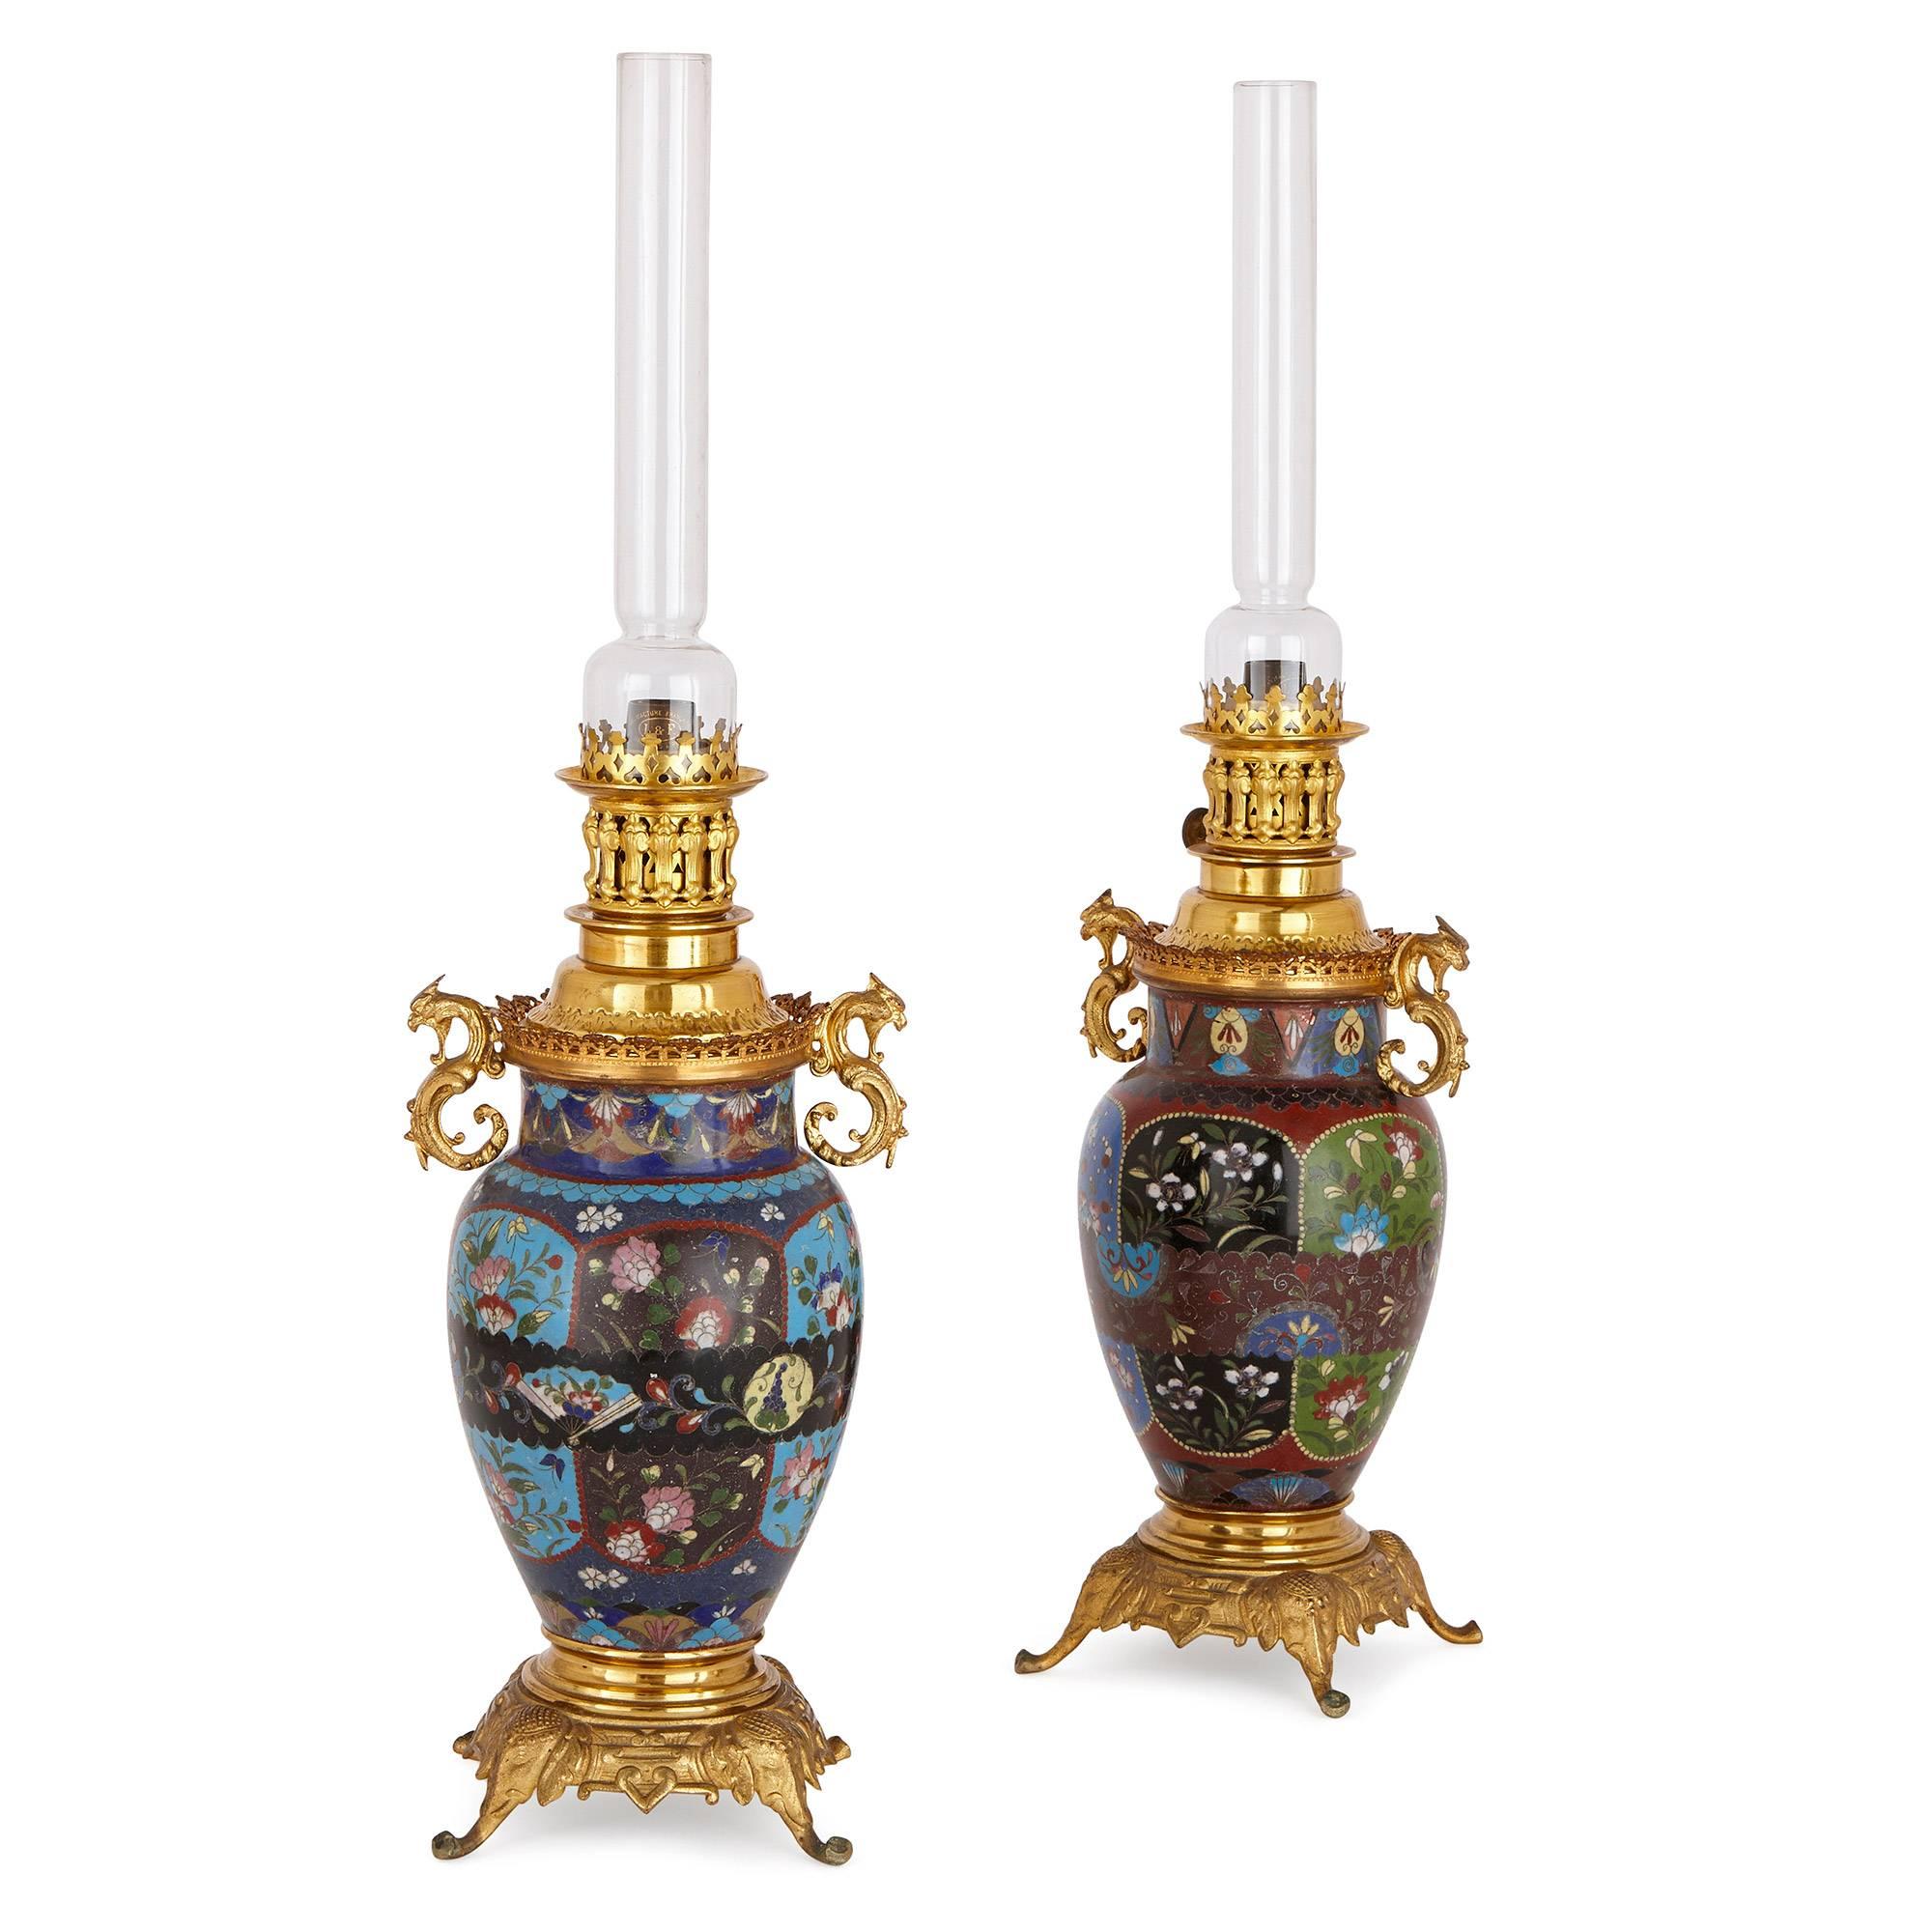 The late 19th and early 20th century craze for Japanese art, known more commonly as Japonism, provides the inspiration for this wonderful pair of lamps. Combining fine Japanese Meiji style cloisonne enamel work with sumptuous French gilt bronze